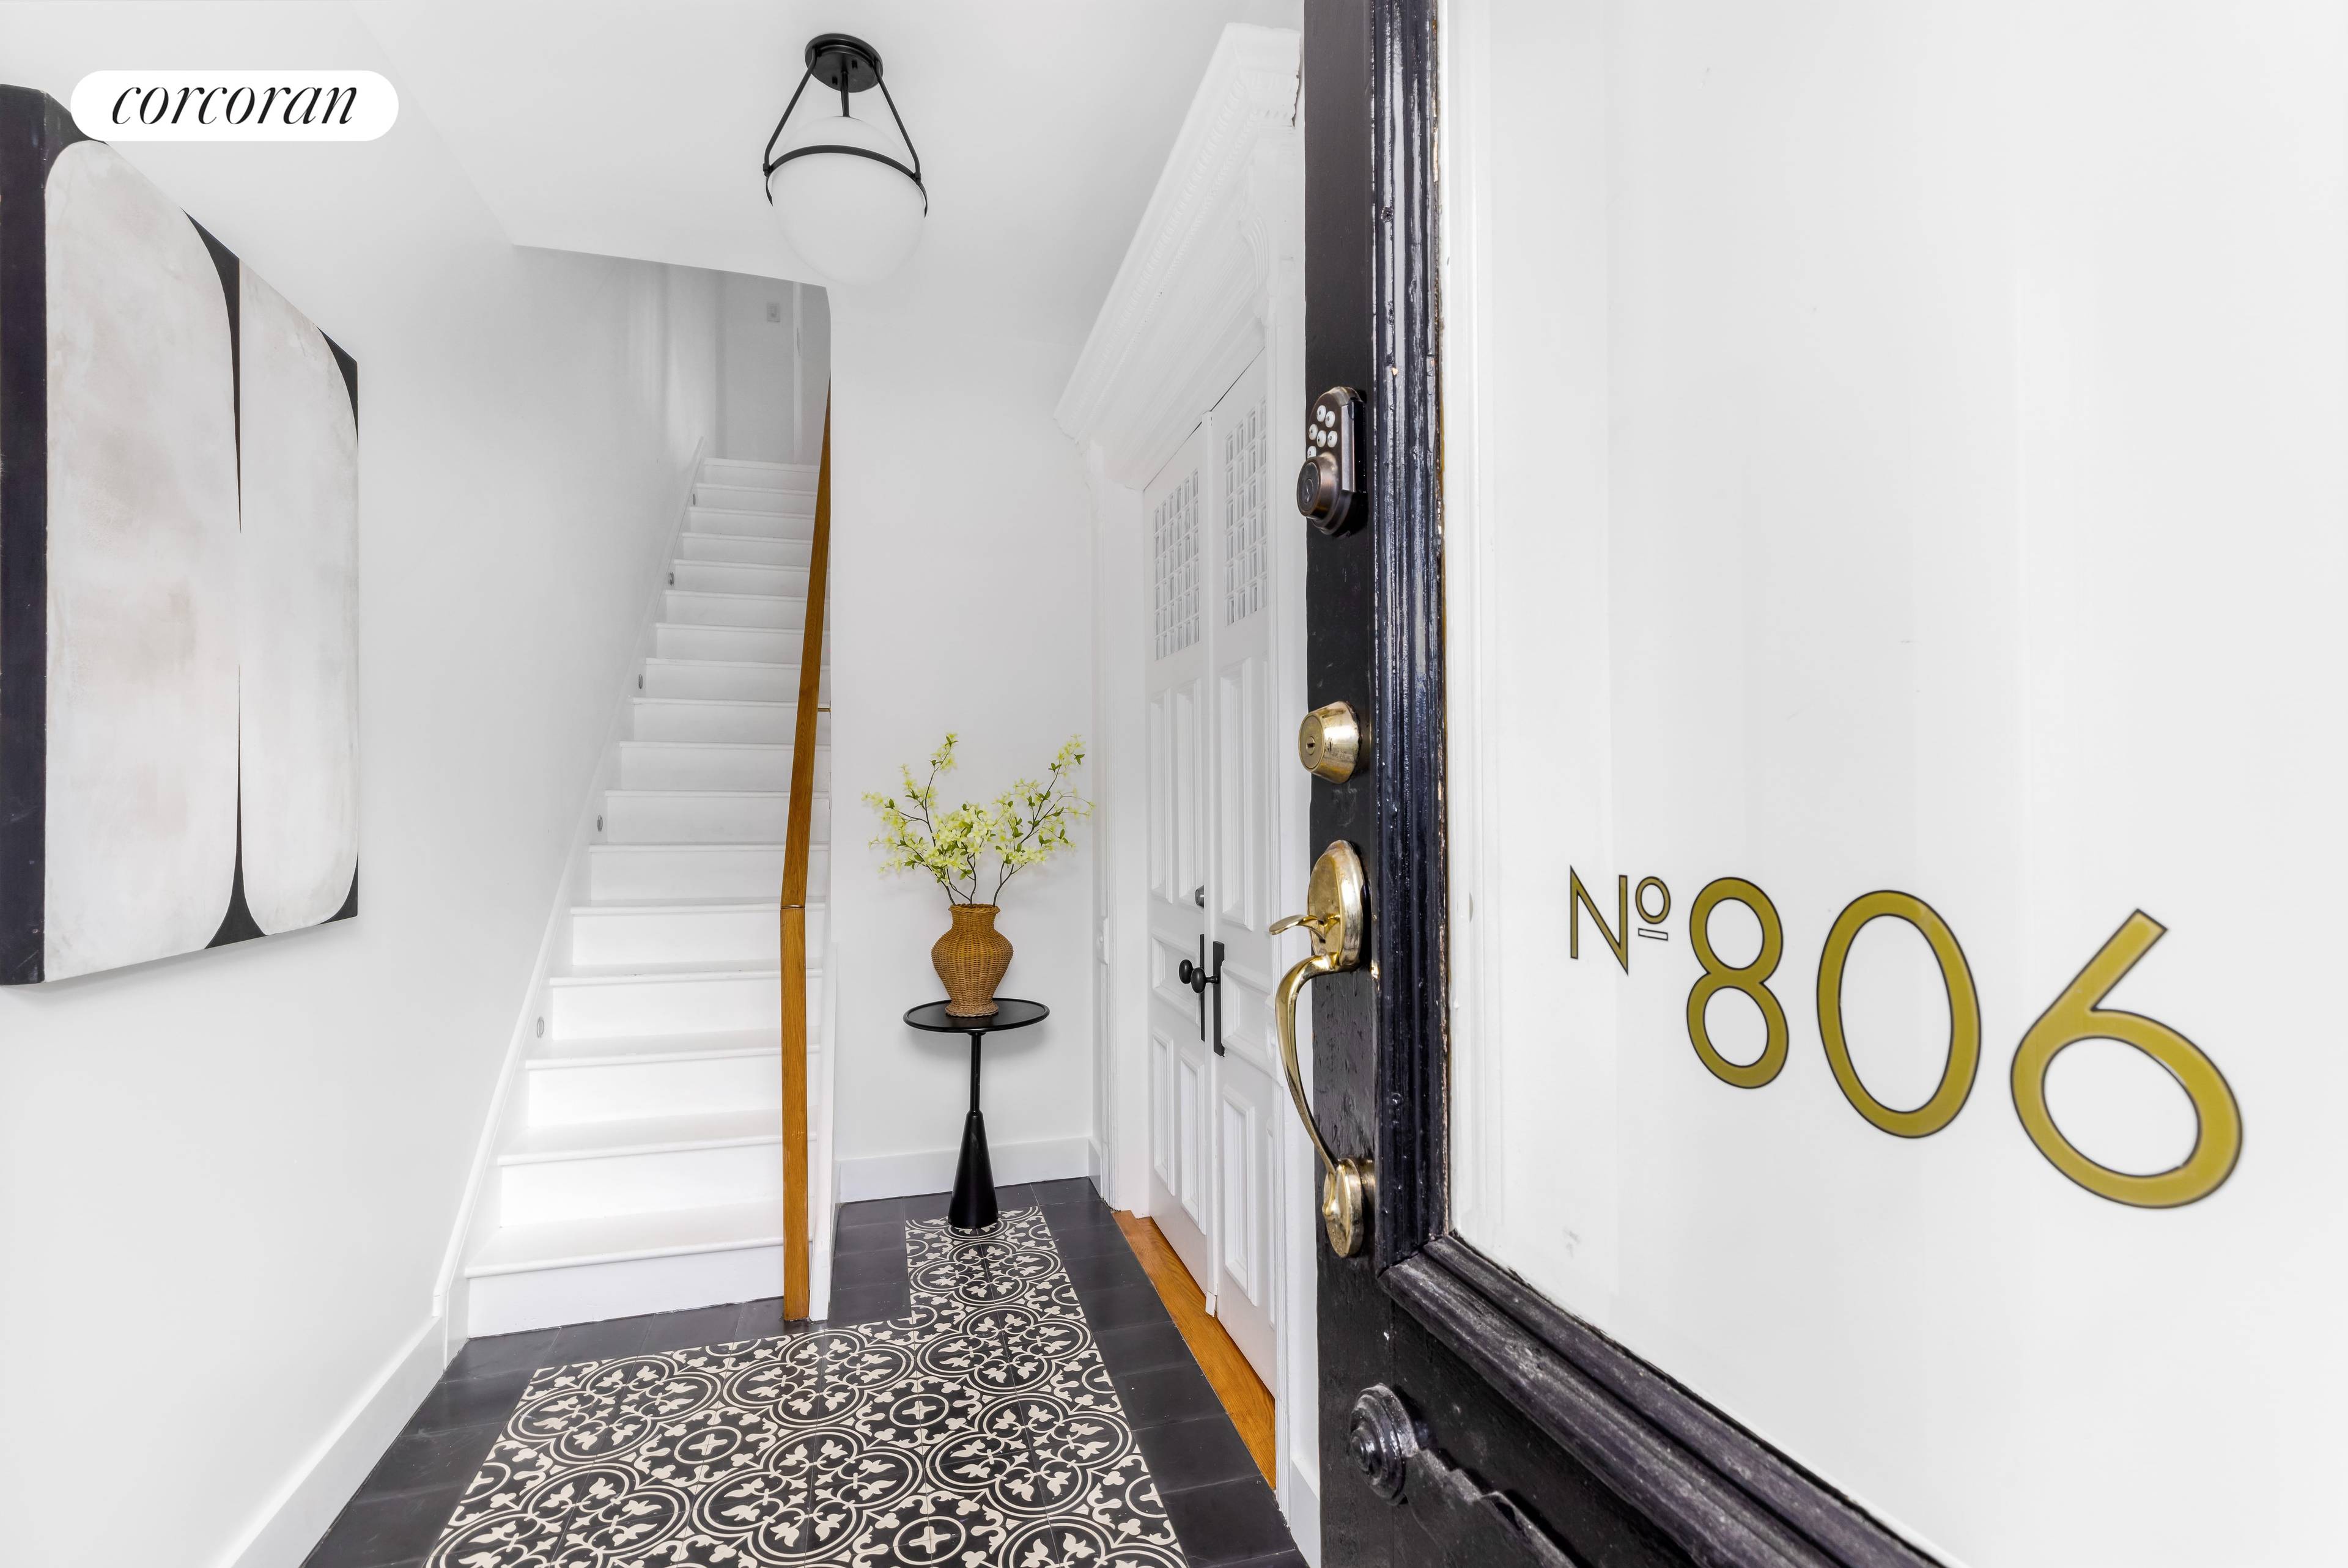 Introducing Unit 2 at 806 Greene Avenue, a sprawling duplex that occupies the third and fourth floors of a classic brownstone in beautiful Bedford Stuyvesant.